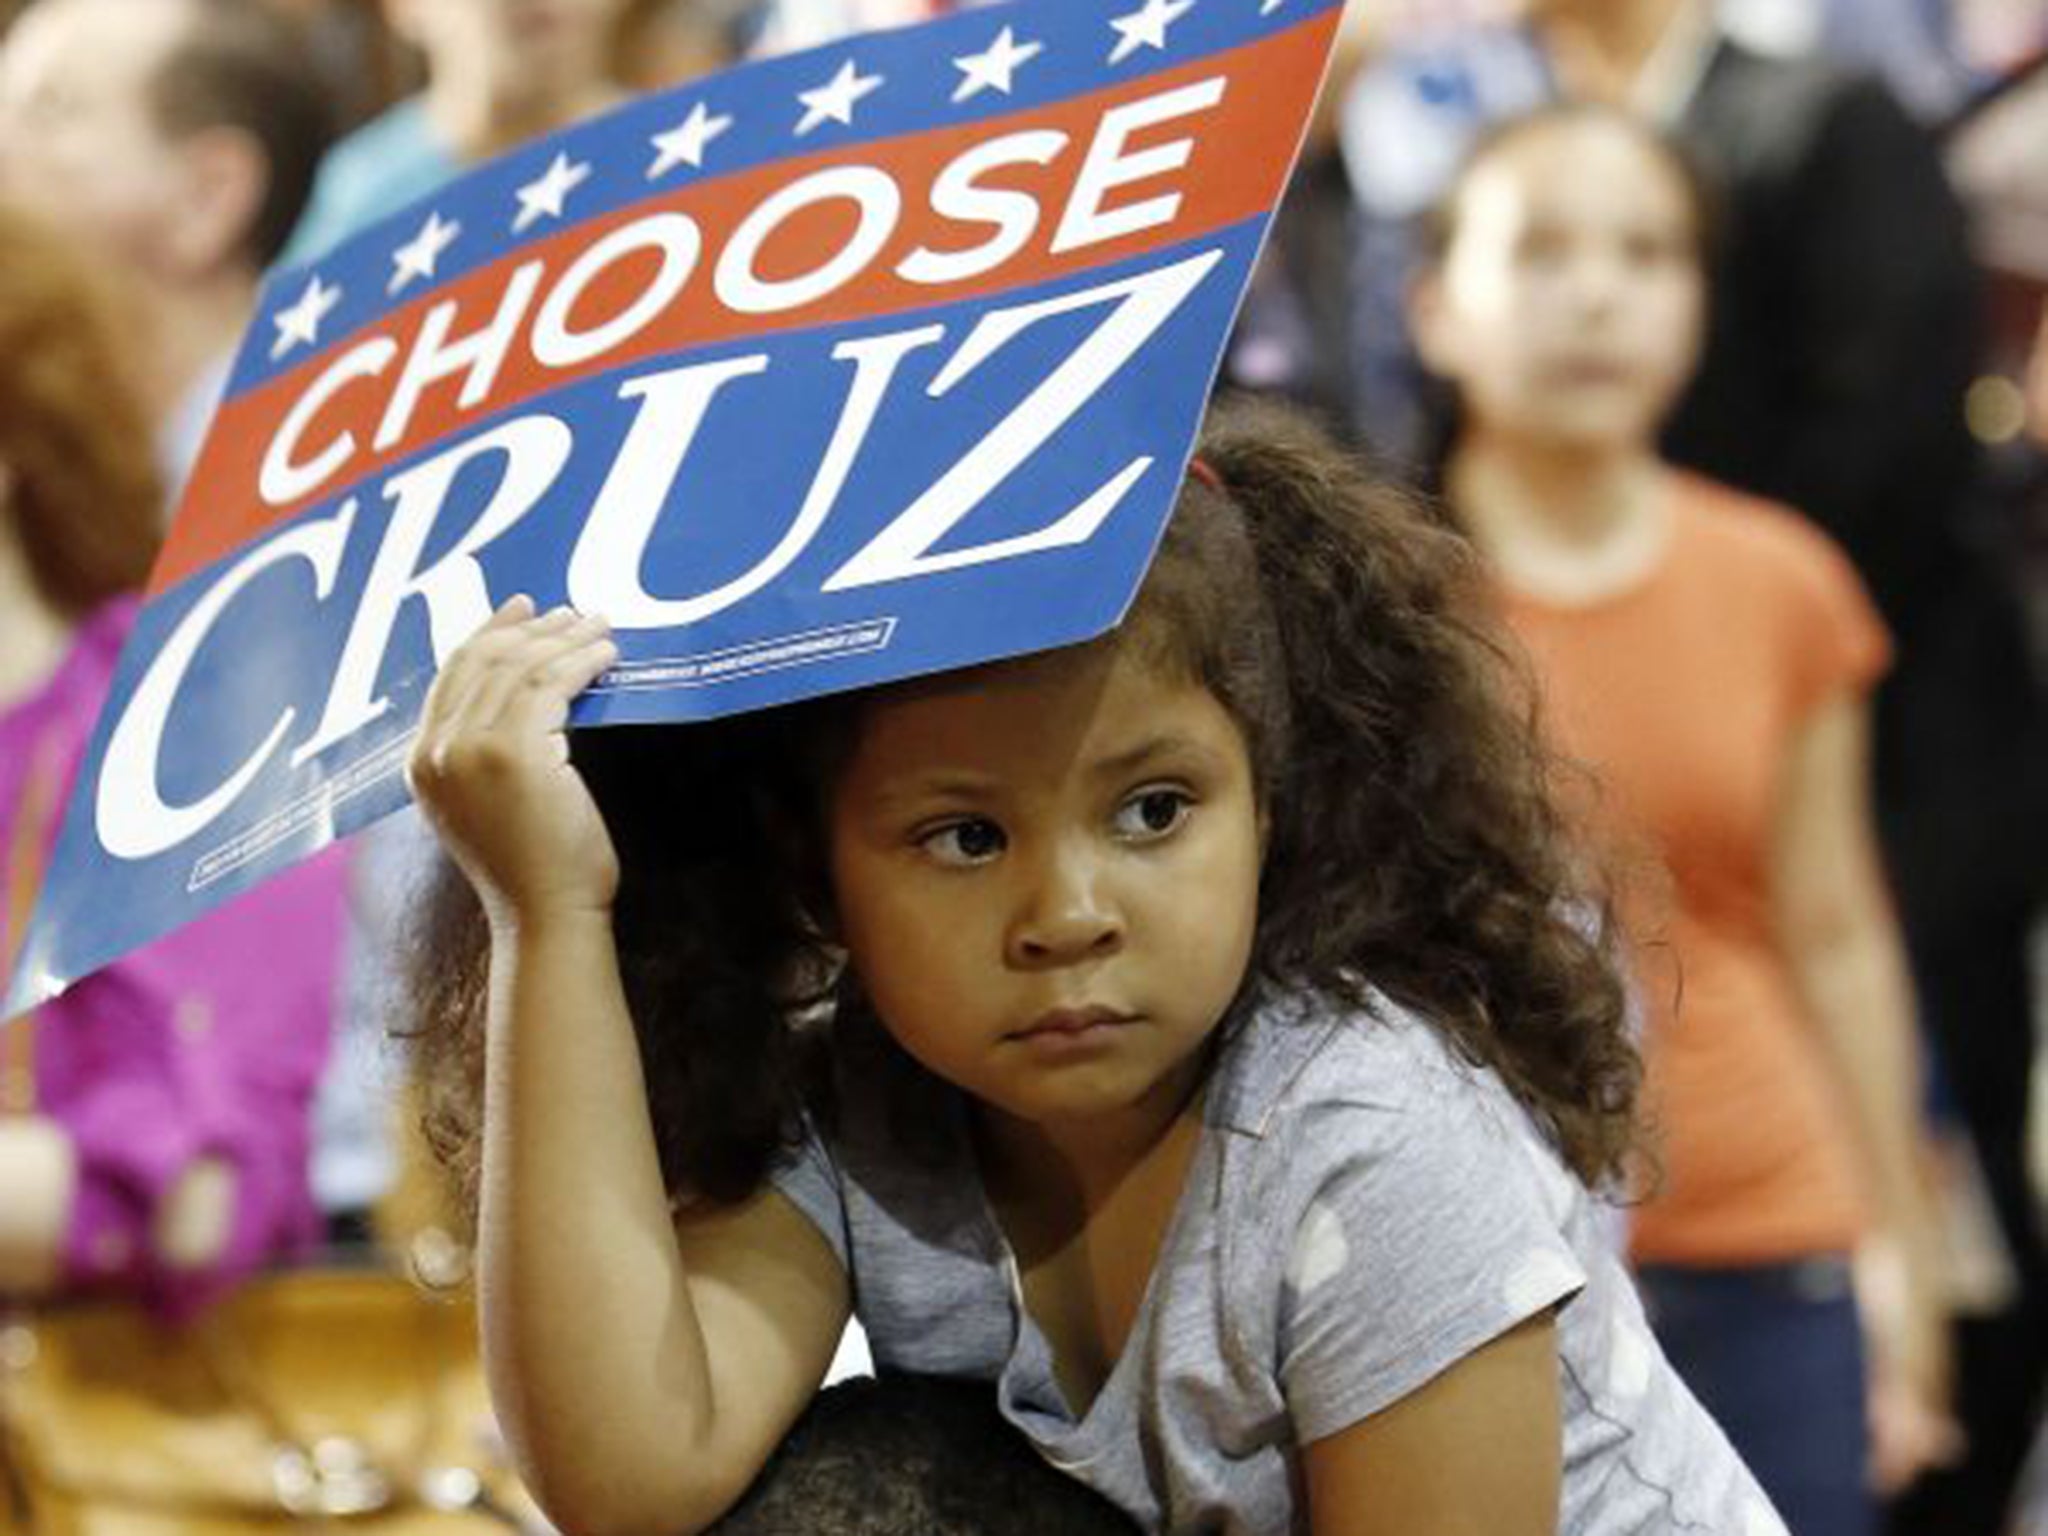 Ted Cruz supporters at a Republican rally.